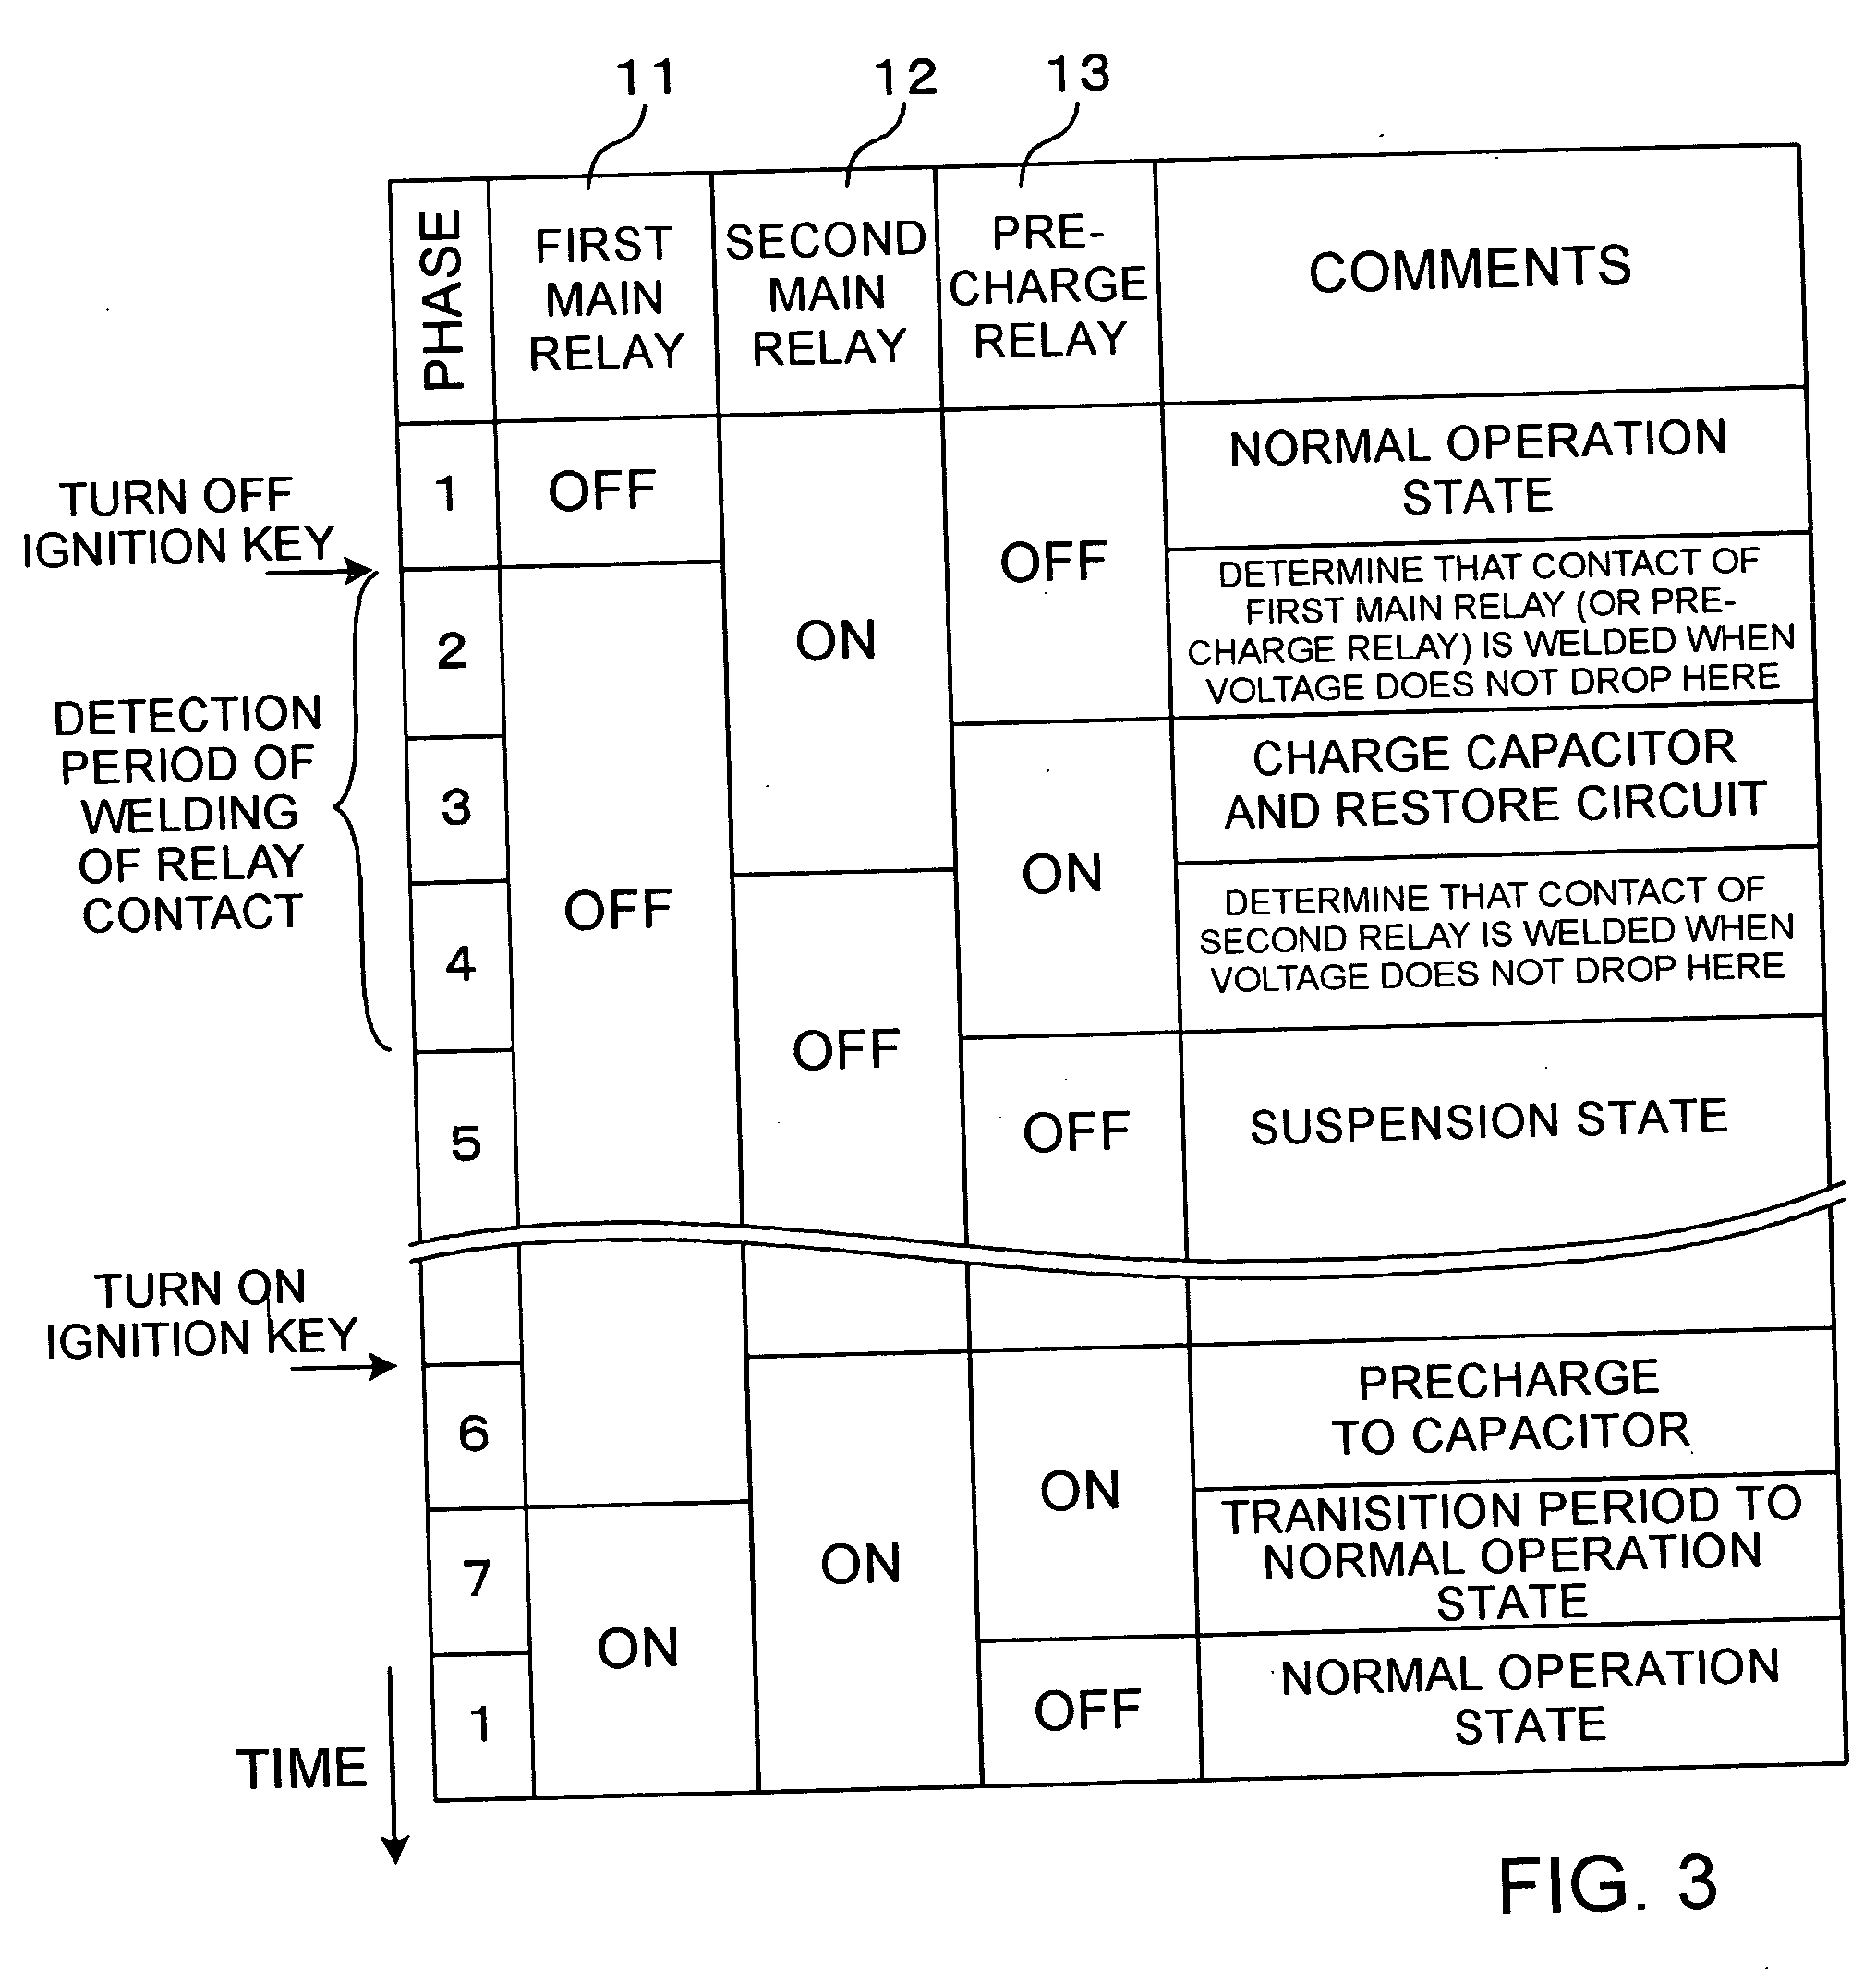 Method and apparatus for detecting welding of a relay contact